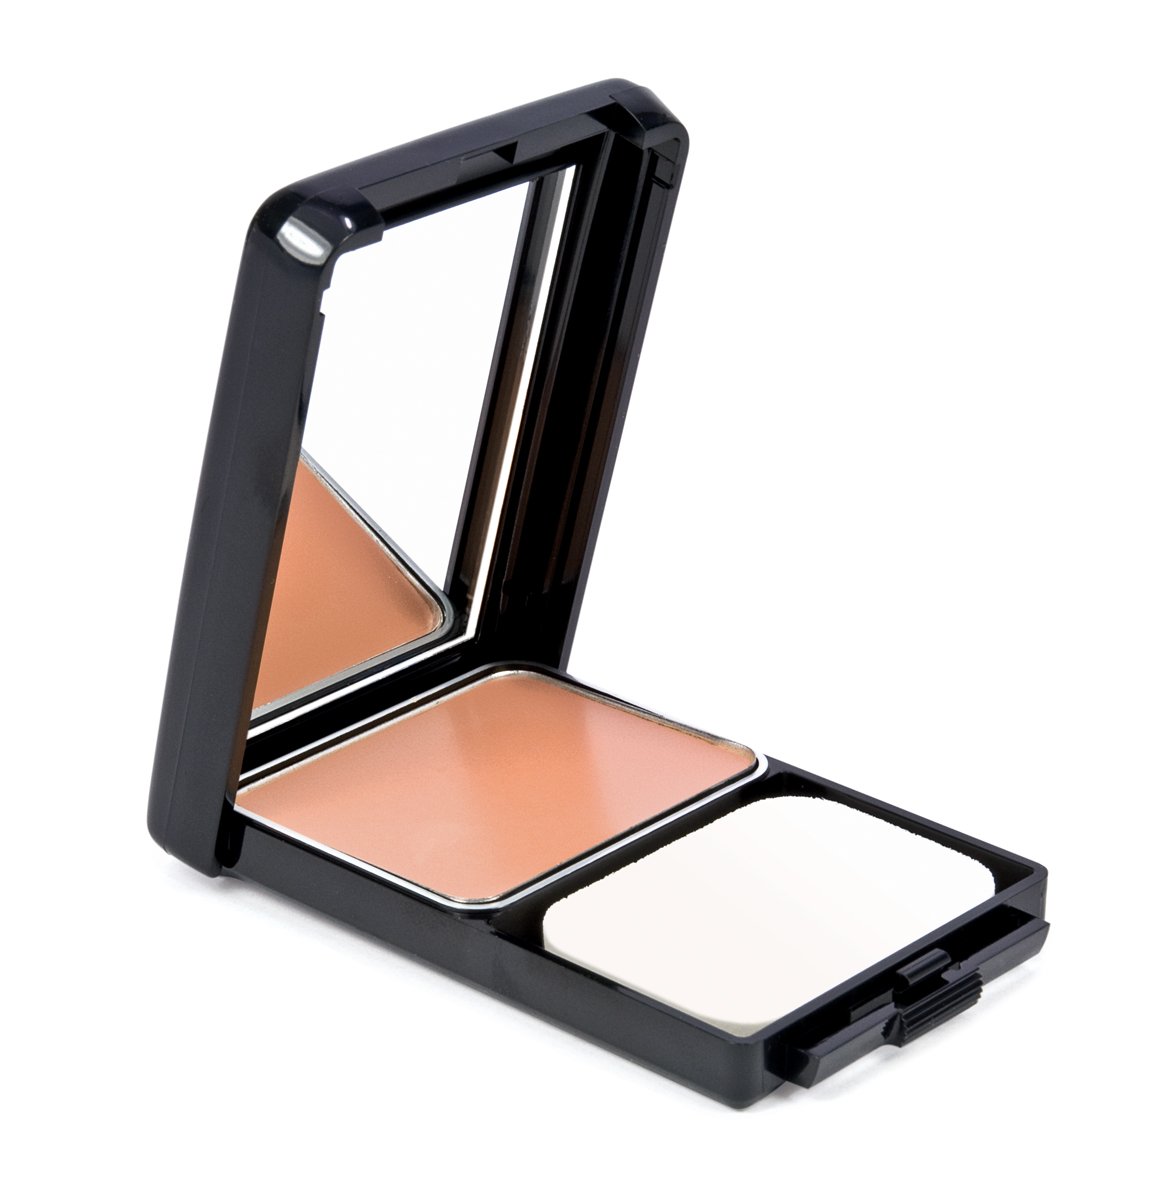  COVERGIRL Ultimate Finish Liquid Powder Make Up Creamy Beige(C) 450, 0.4 Ounce Compact (packaging may vary)